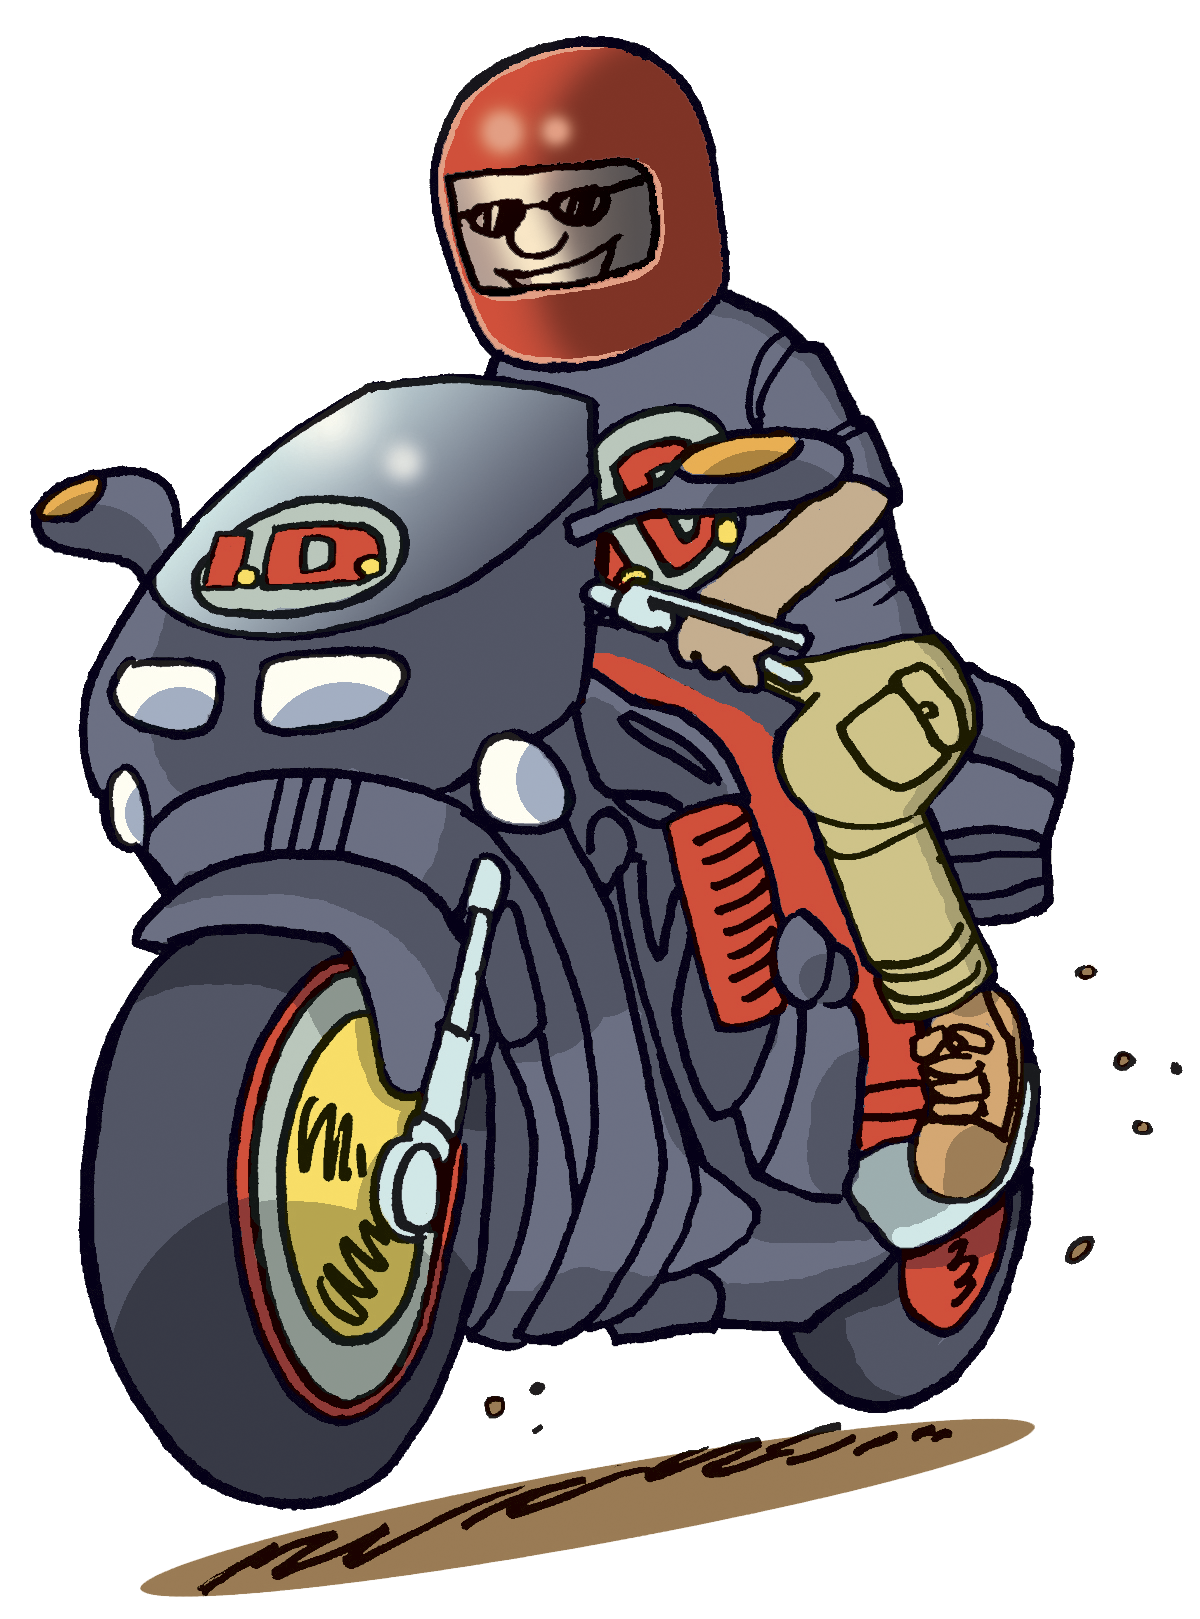 Clip art of motorcycle 